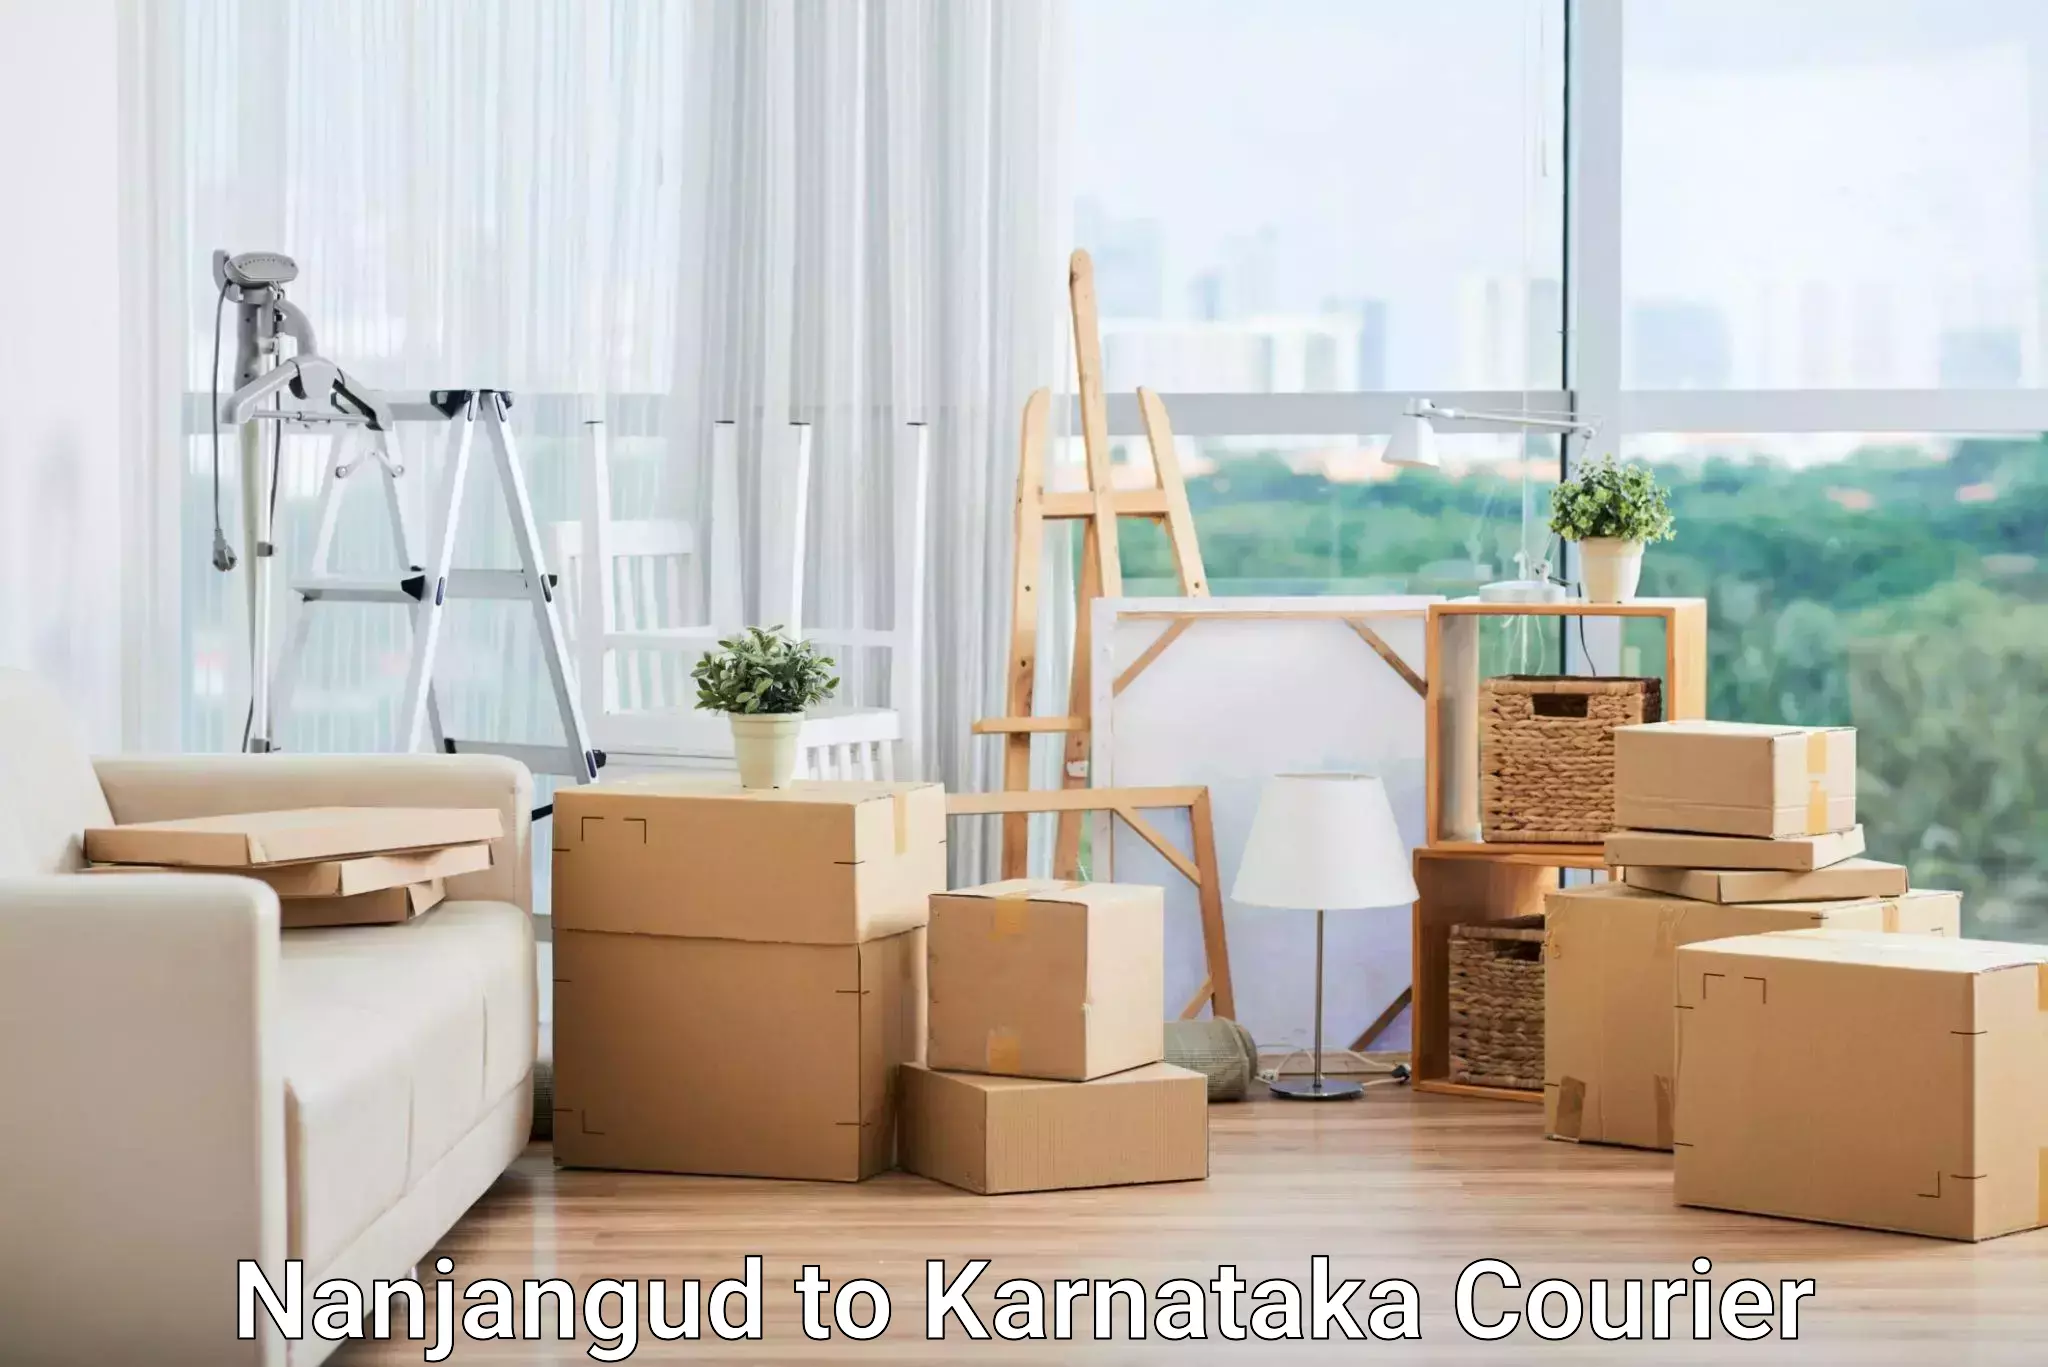 Multi-national courier services Nanjangud to Yellapur